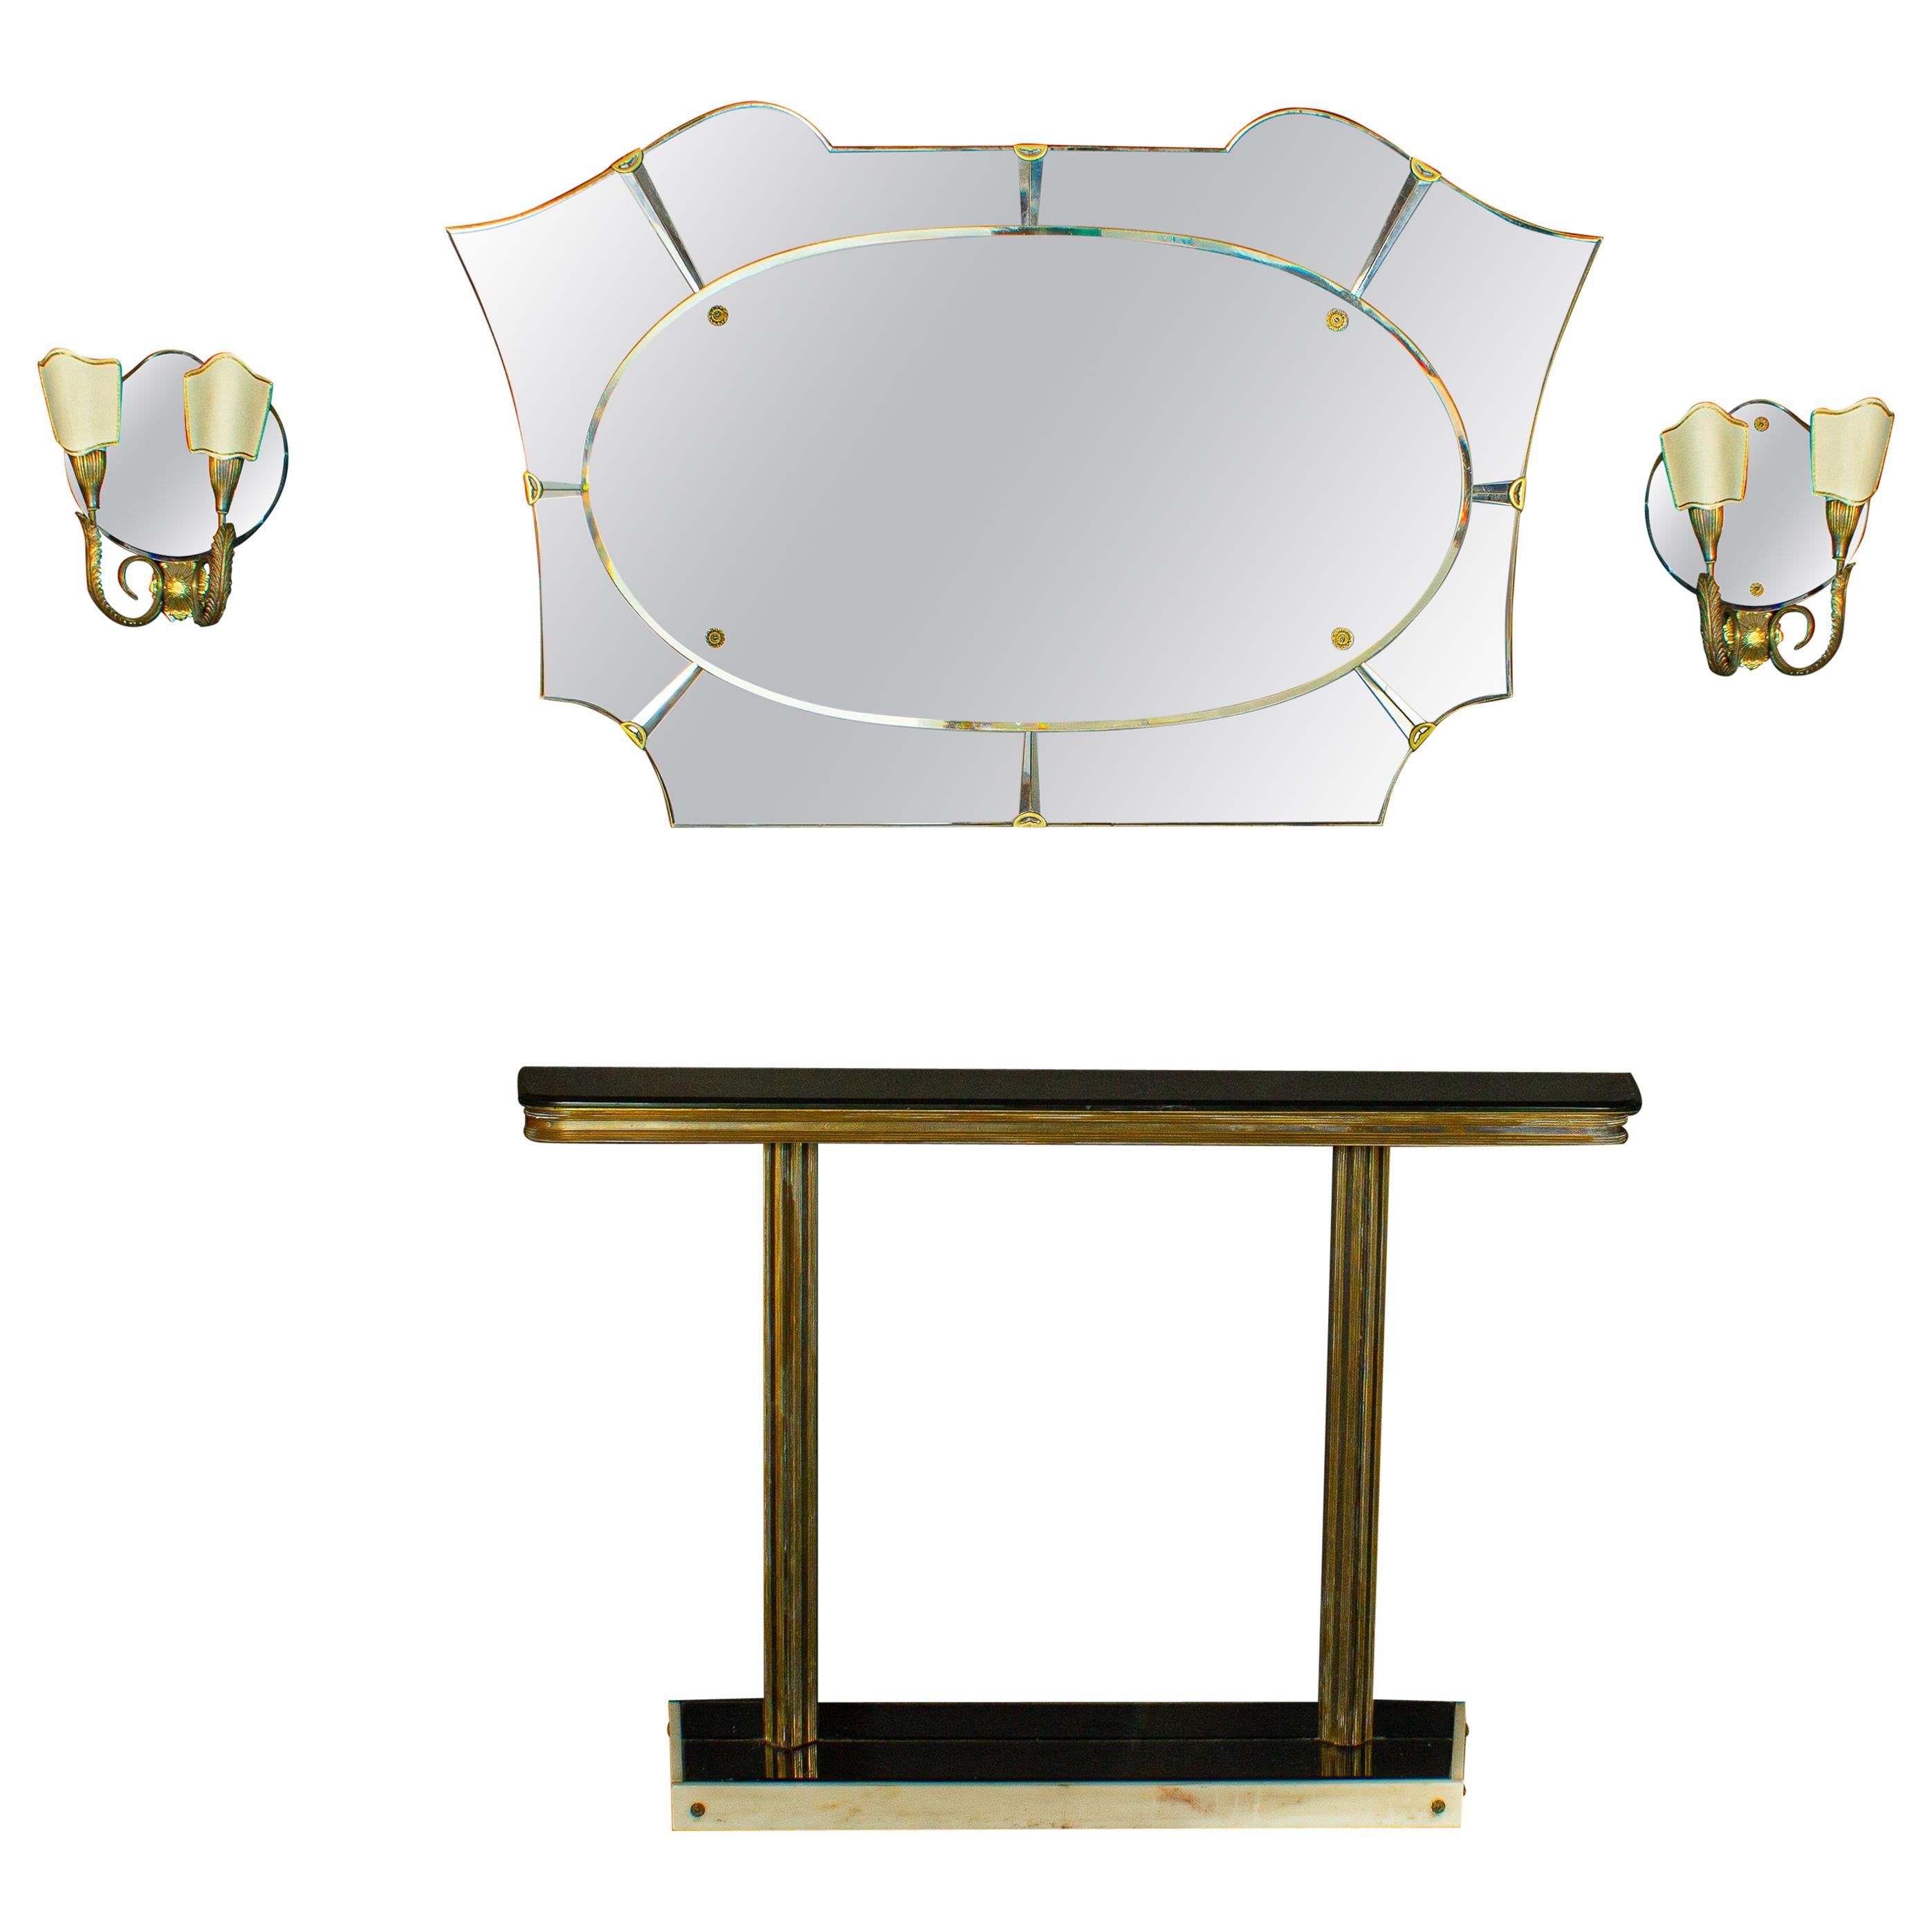 Italian Midcentury Design Console Table with Mirror and Sconces, 1950